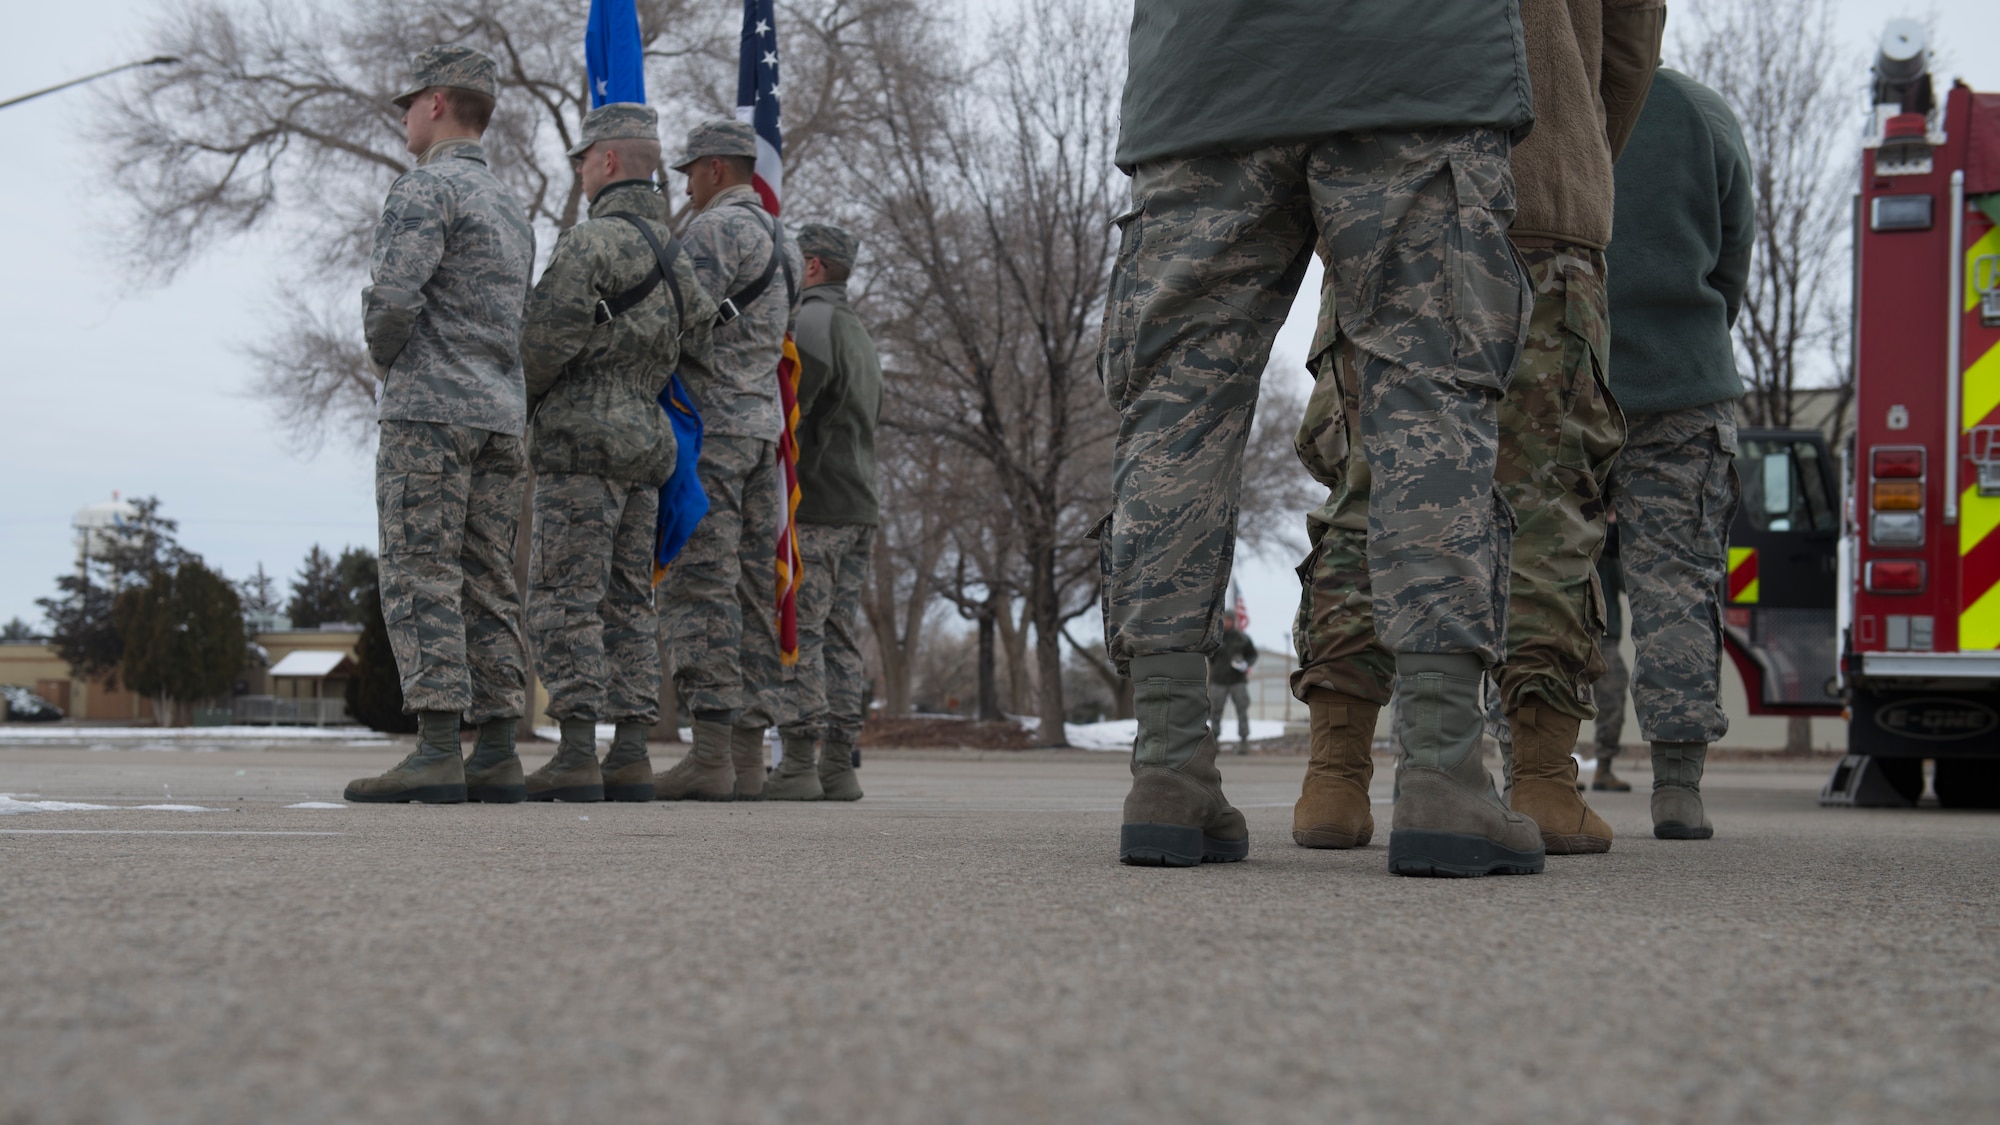 Base ceremonial guardsmen participate in funeral sequence training Dec. 7, 2018, at Mountain Home Air Force Base, Idaho. The U.S. Air Force Honor Guard held a ceremonial guardsman training course Dec. 3-12 to help the base honor guard maintain their skills during multiple member sequence training. (U.S. Air Force photo by Airman 1st Class JaNae Capuno)